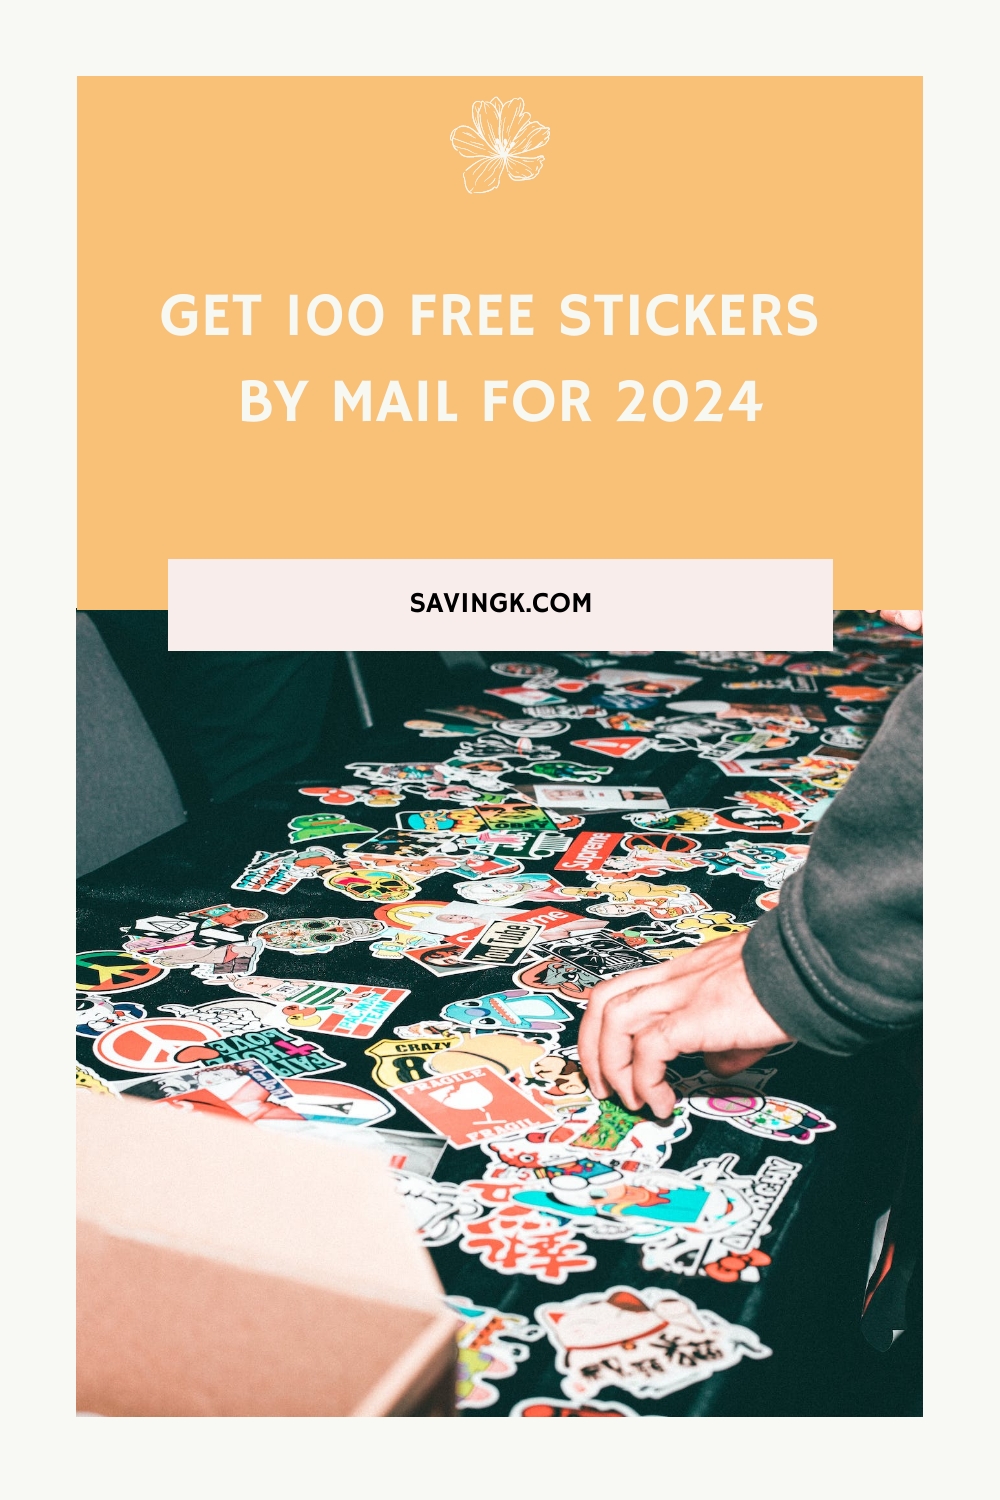 Request 100 Free Stickers Via Mail For 2024